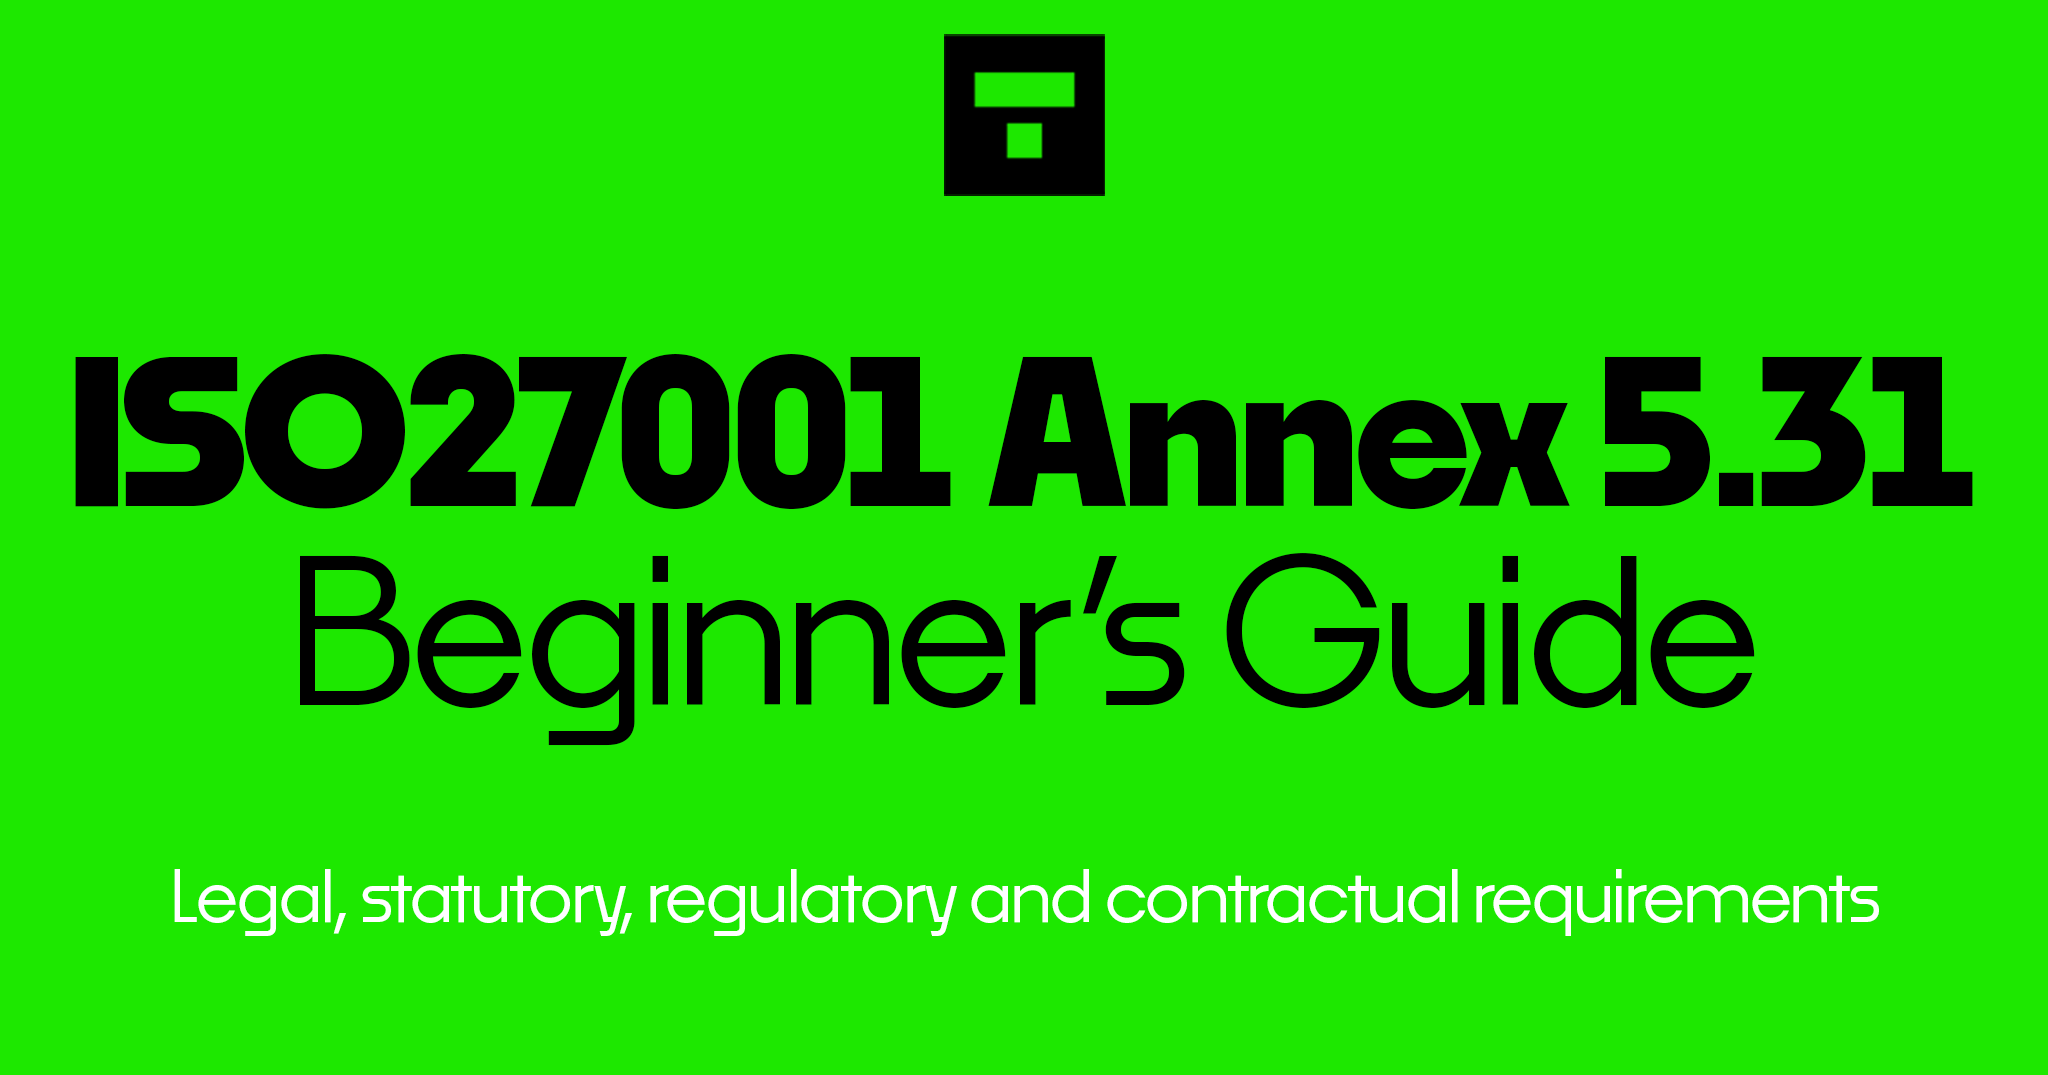 ISO 27001 Annex A 5.31 Legal, statutory, regulatory and contractual requirements Beginner's Guide